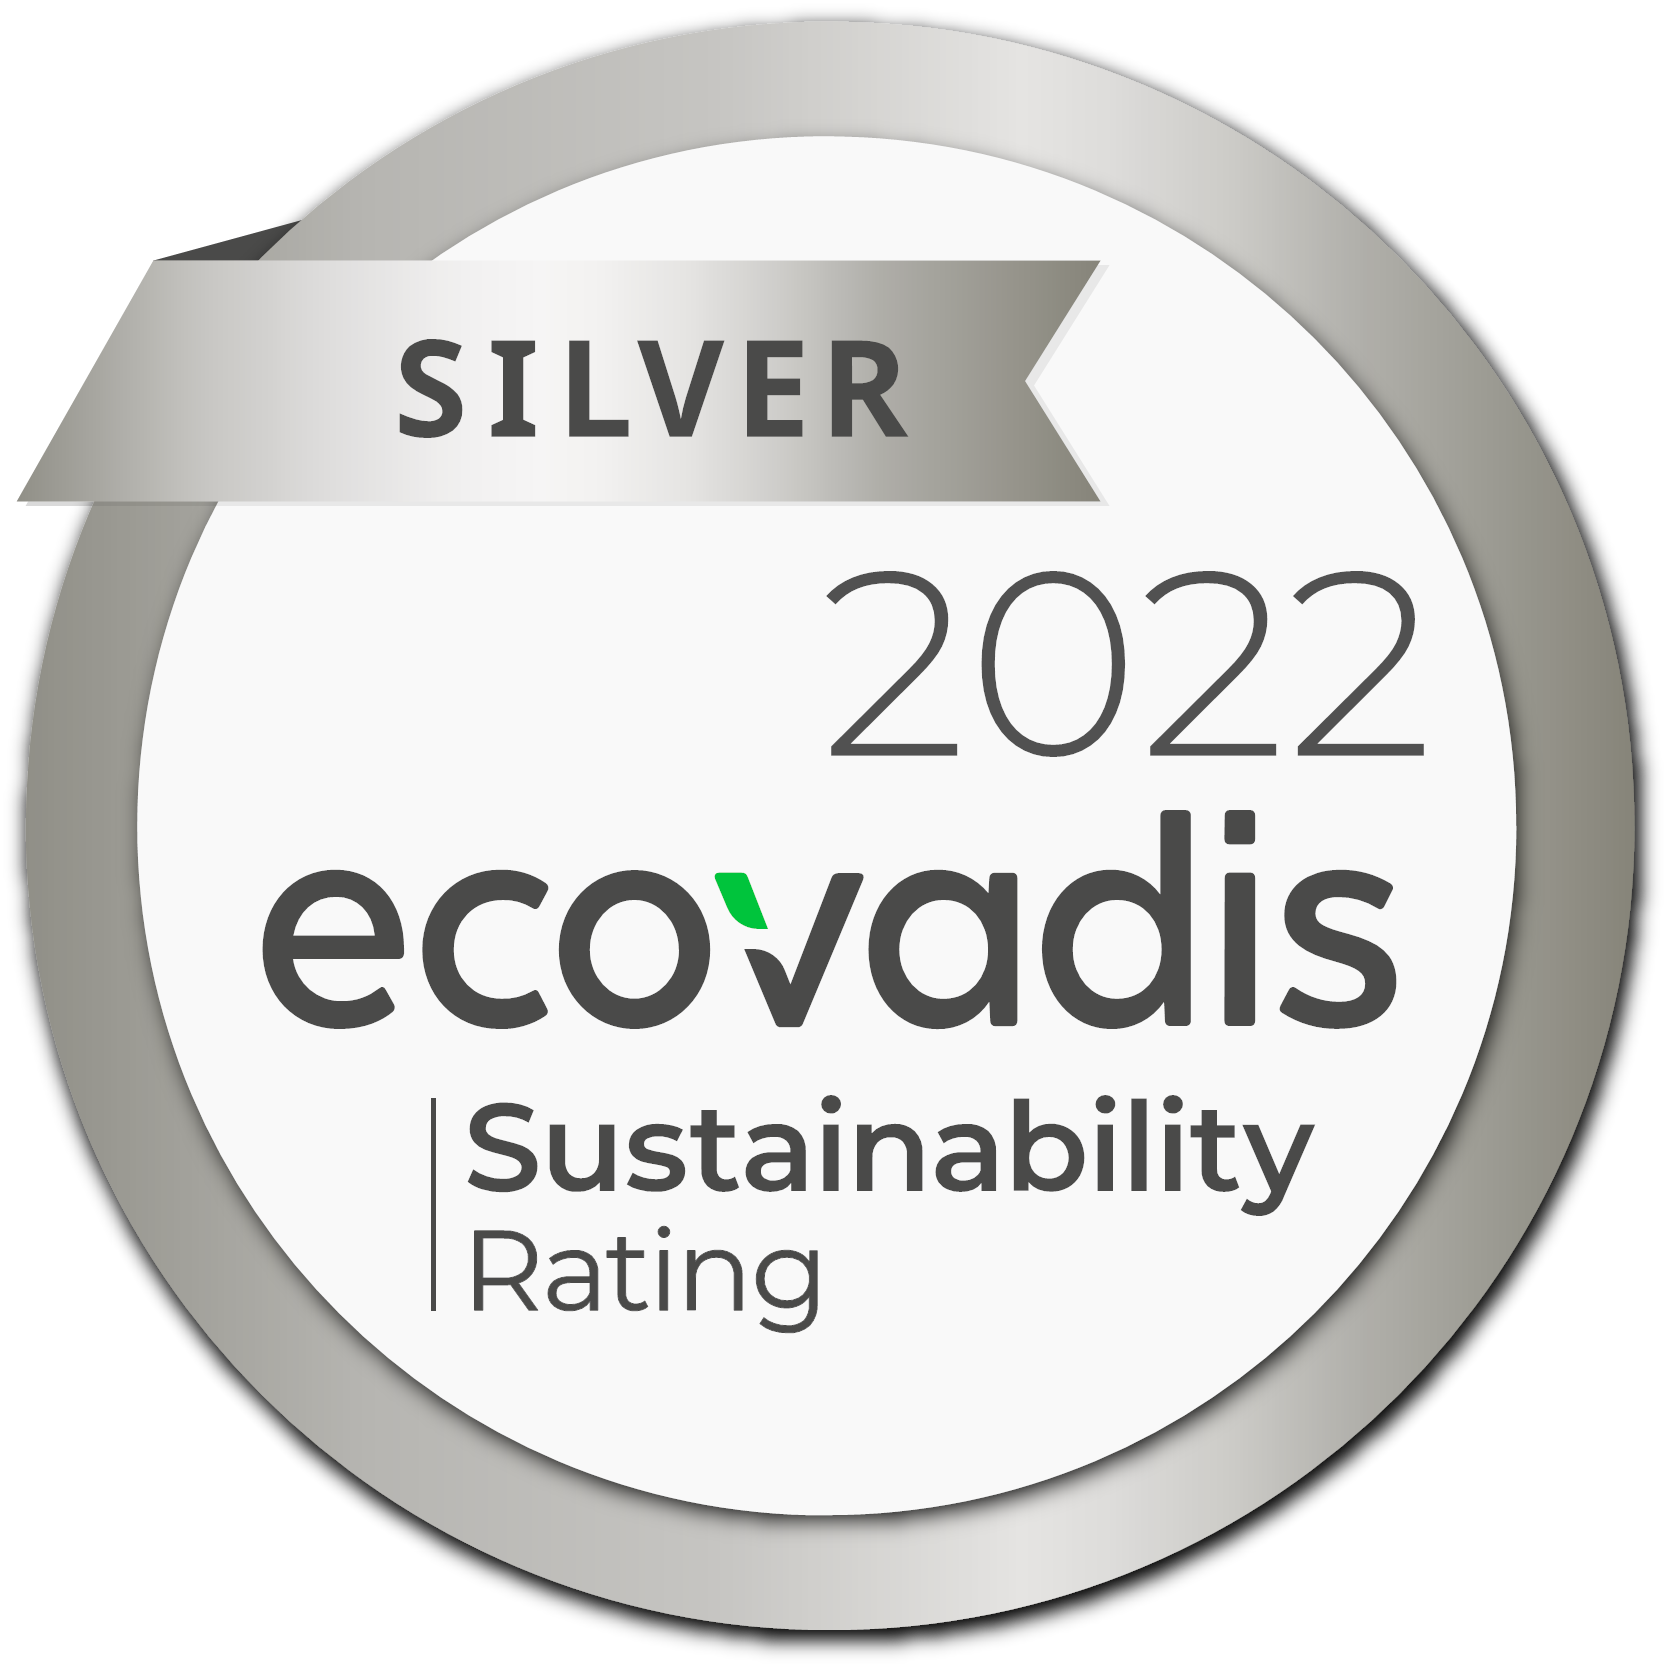 ALD AUTOMOTIVE IN BULGARIA RECEIVES THE ECOVADIS SILVER MEDAL FOR SUSTAINABILITY